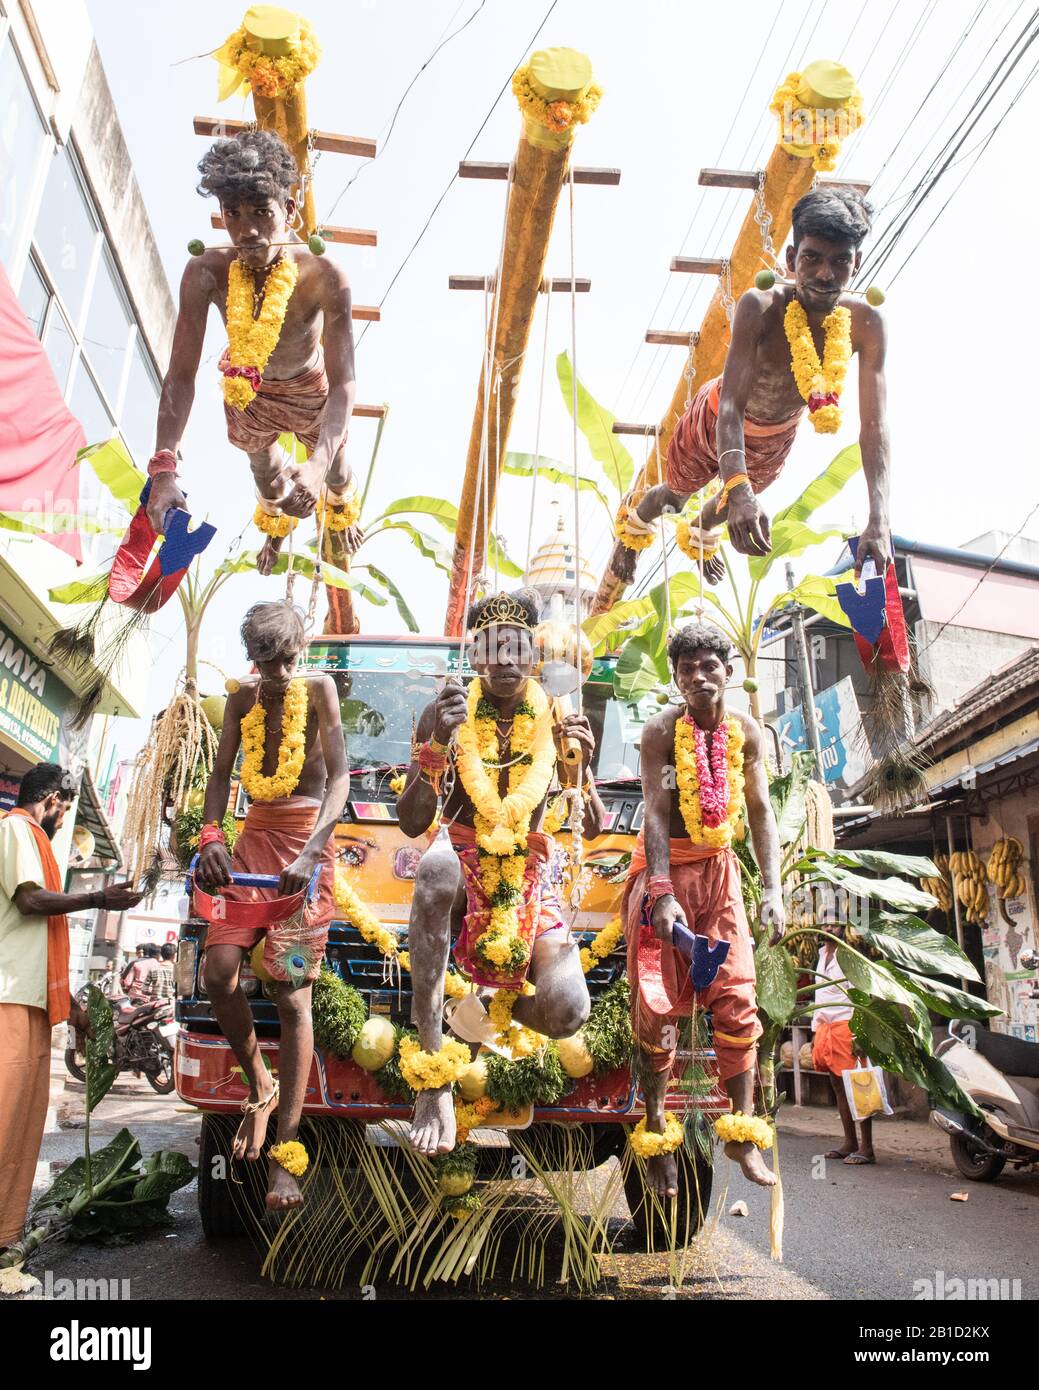 Devotees hanging by hooks piercing their skin as a ritualistic act of devotion, Garudan Thookkam (Eagle Hanging), during Thaipooyam, or Thaipoosam, Fe Stock Photo